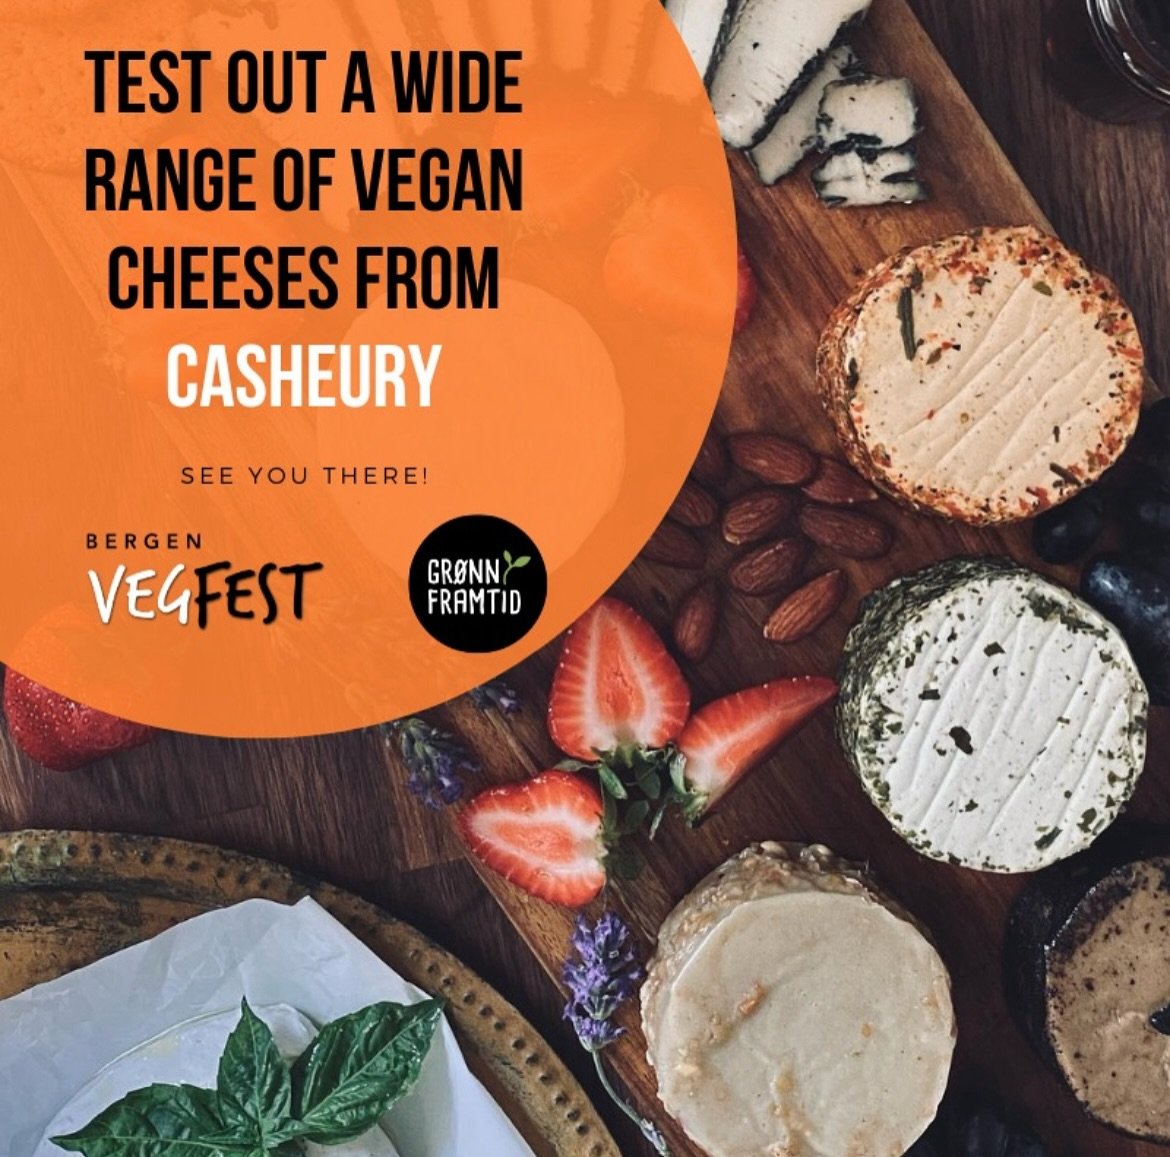 BERGEN 🇳🇴SEE YOU ON SATURDAY!
This coming Saturday, Casheury will be on the west coast of Norway for you to try and buy our full range of artisanal vegan products.

Which cheeze are you looking forward to trying?
VOTE BELOW

Looking forward to seei